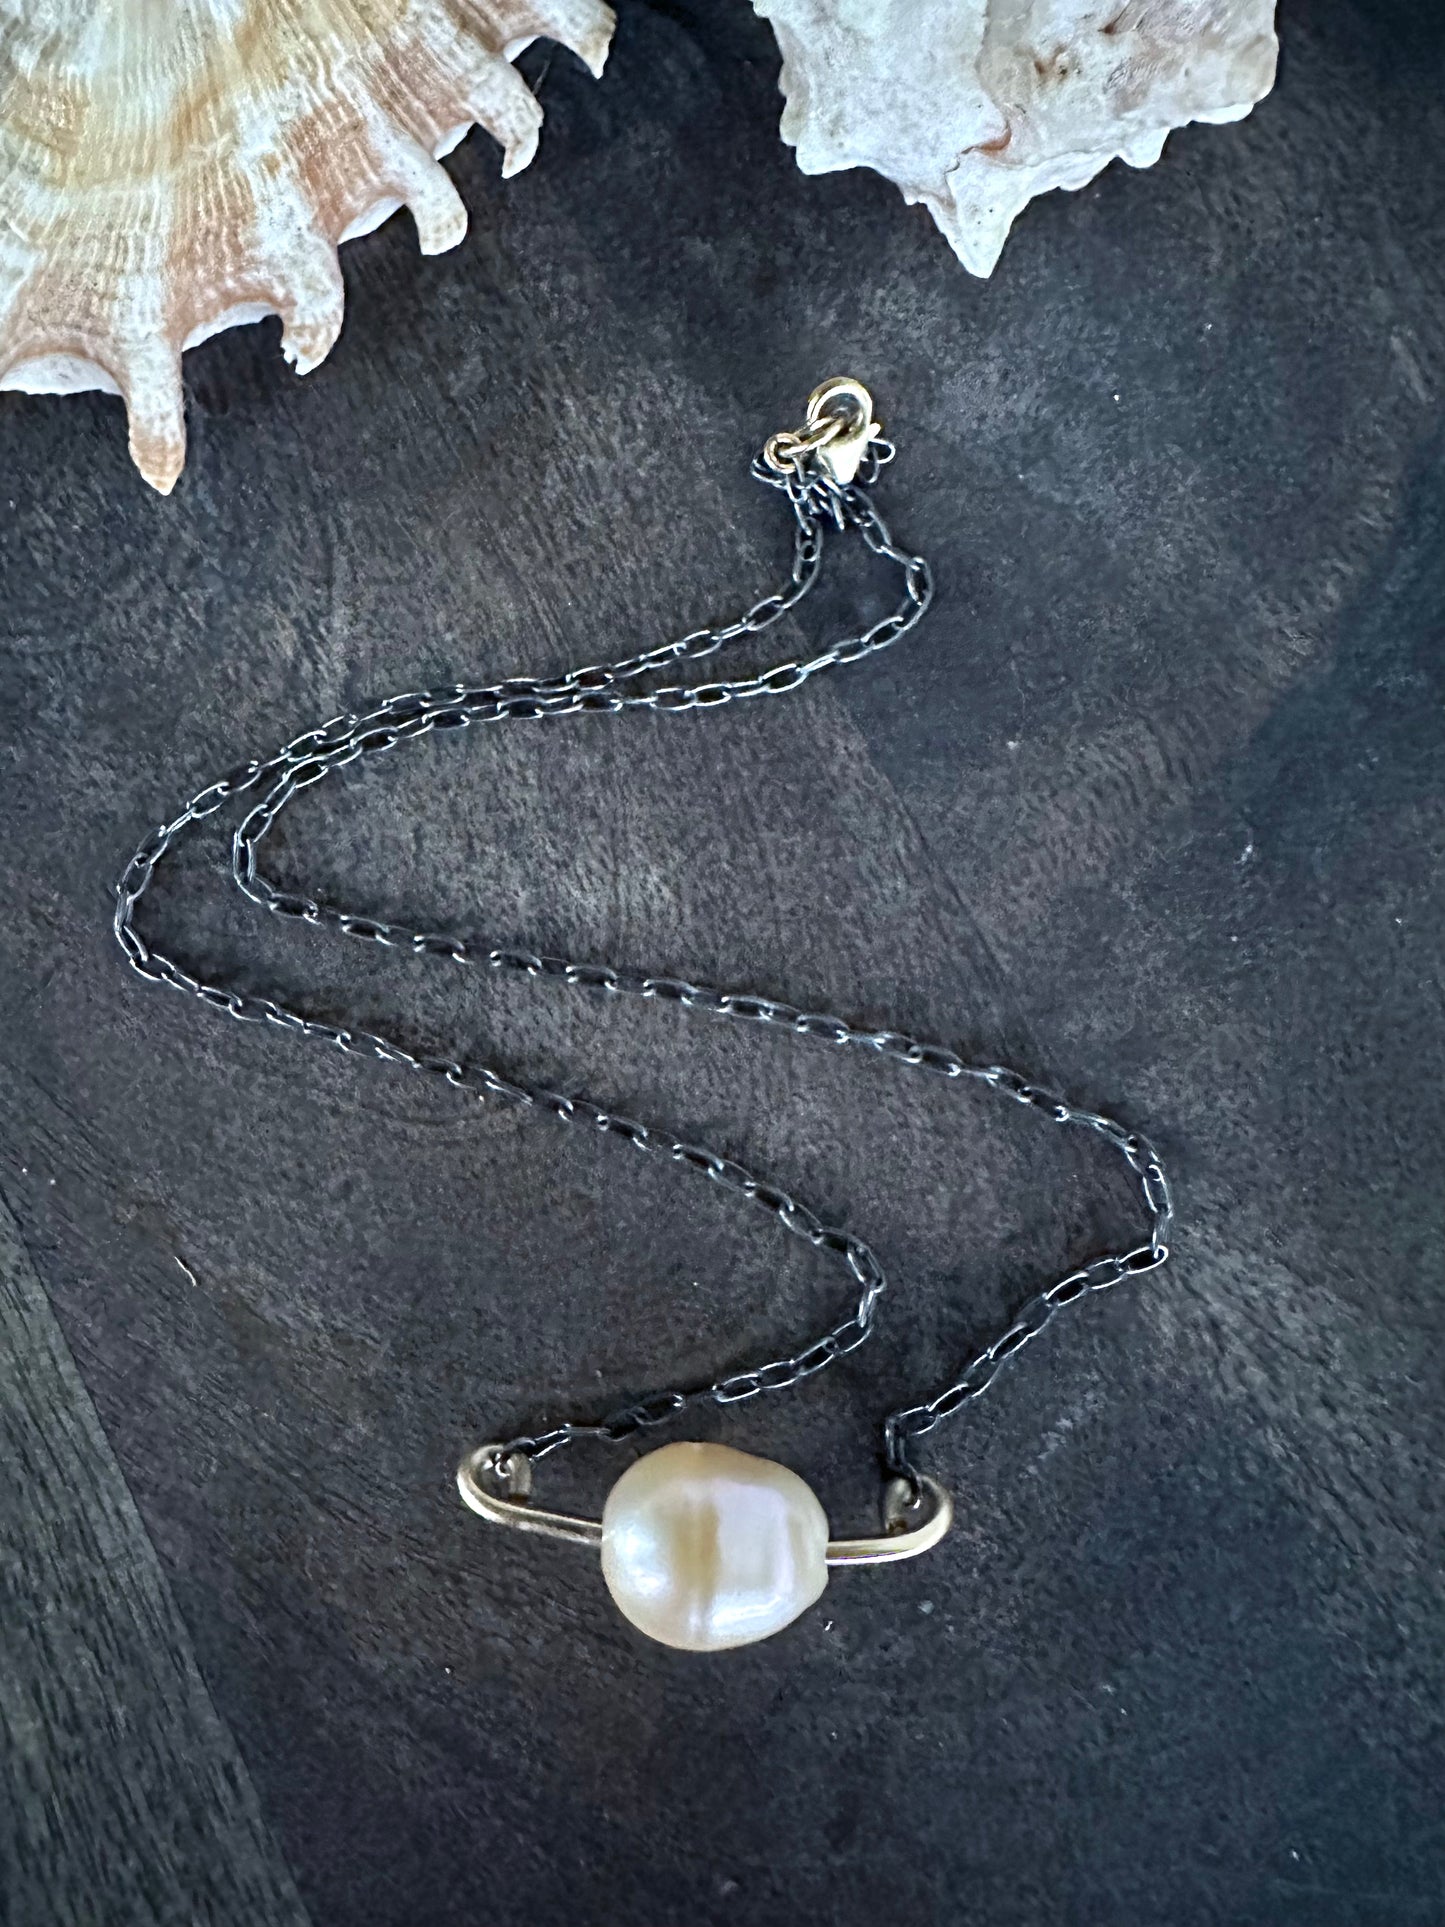 Orions Belt: Tahitian Or Baroque Fireball Pearl on a Gold Bar Necklace